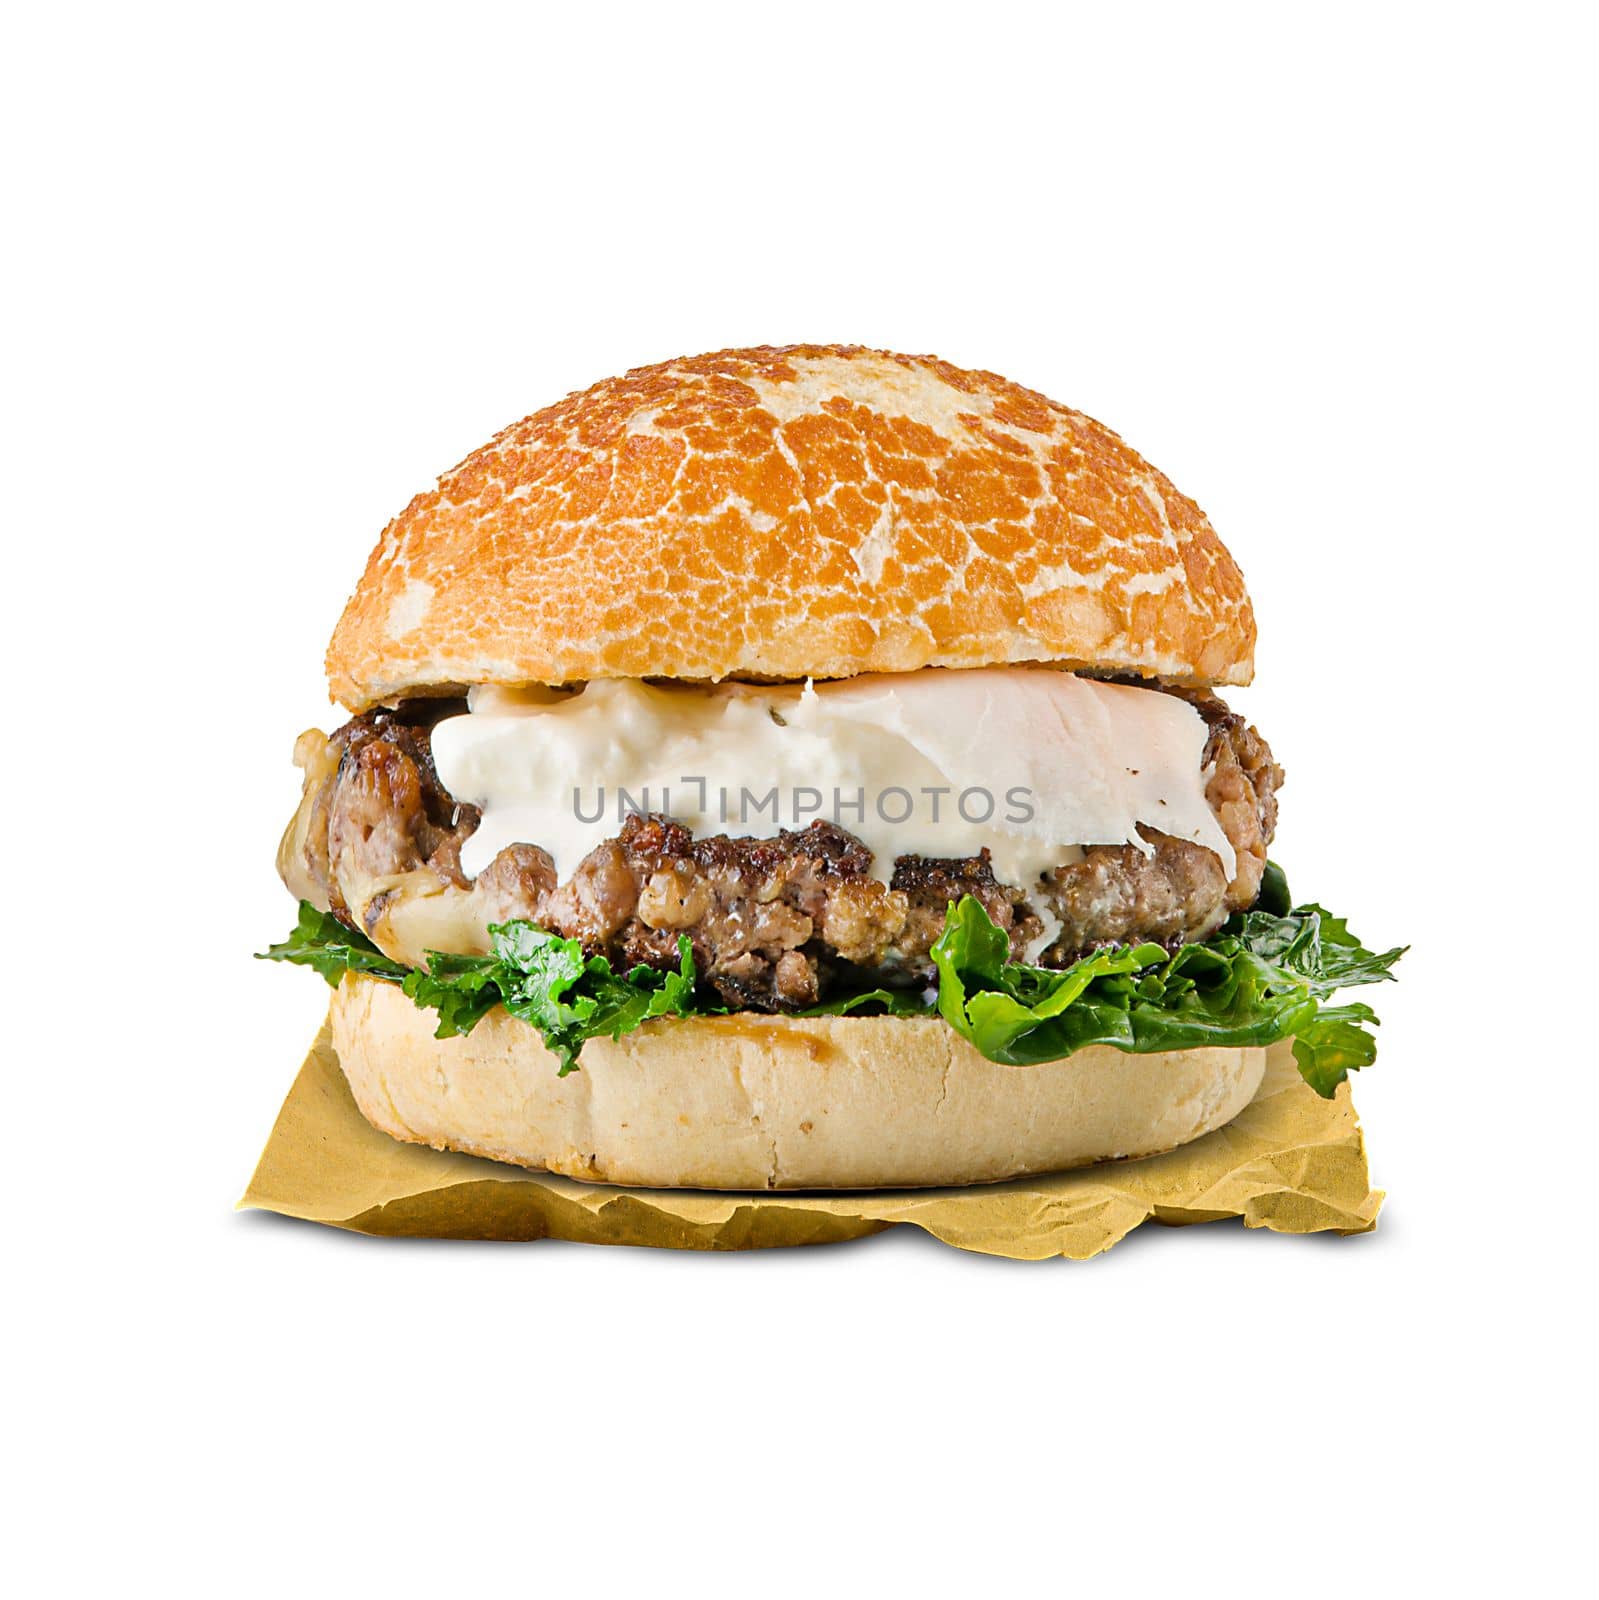 Special Hamburger gourmet with fresh cheese